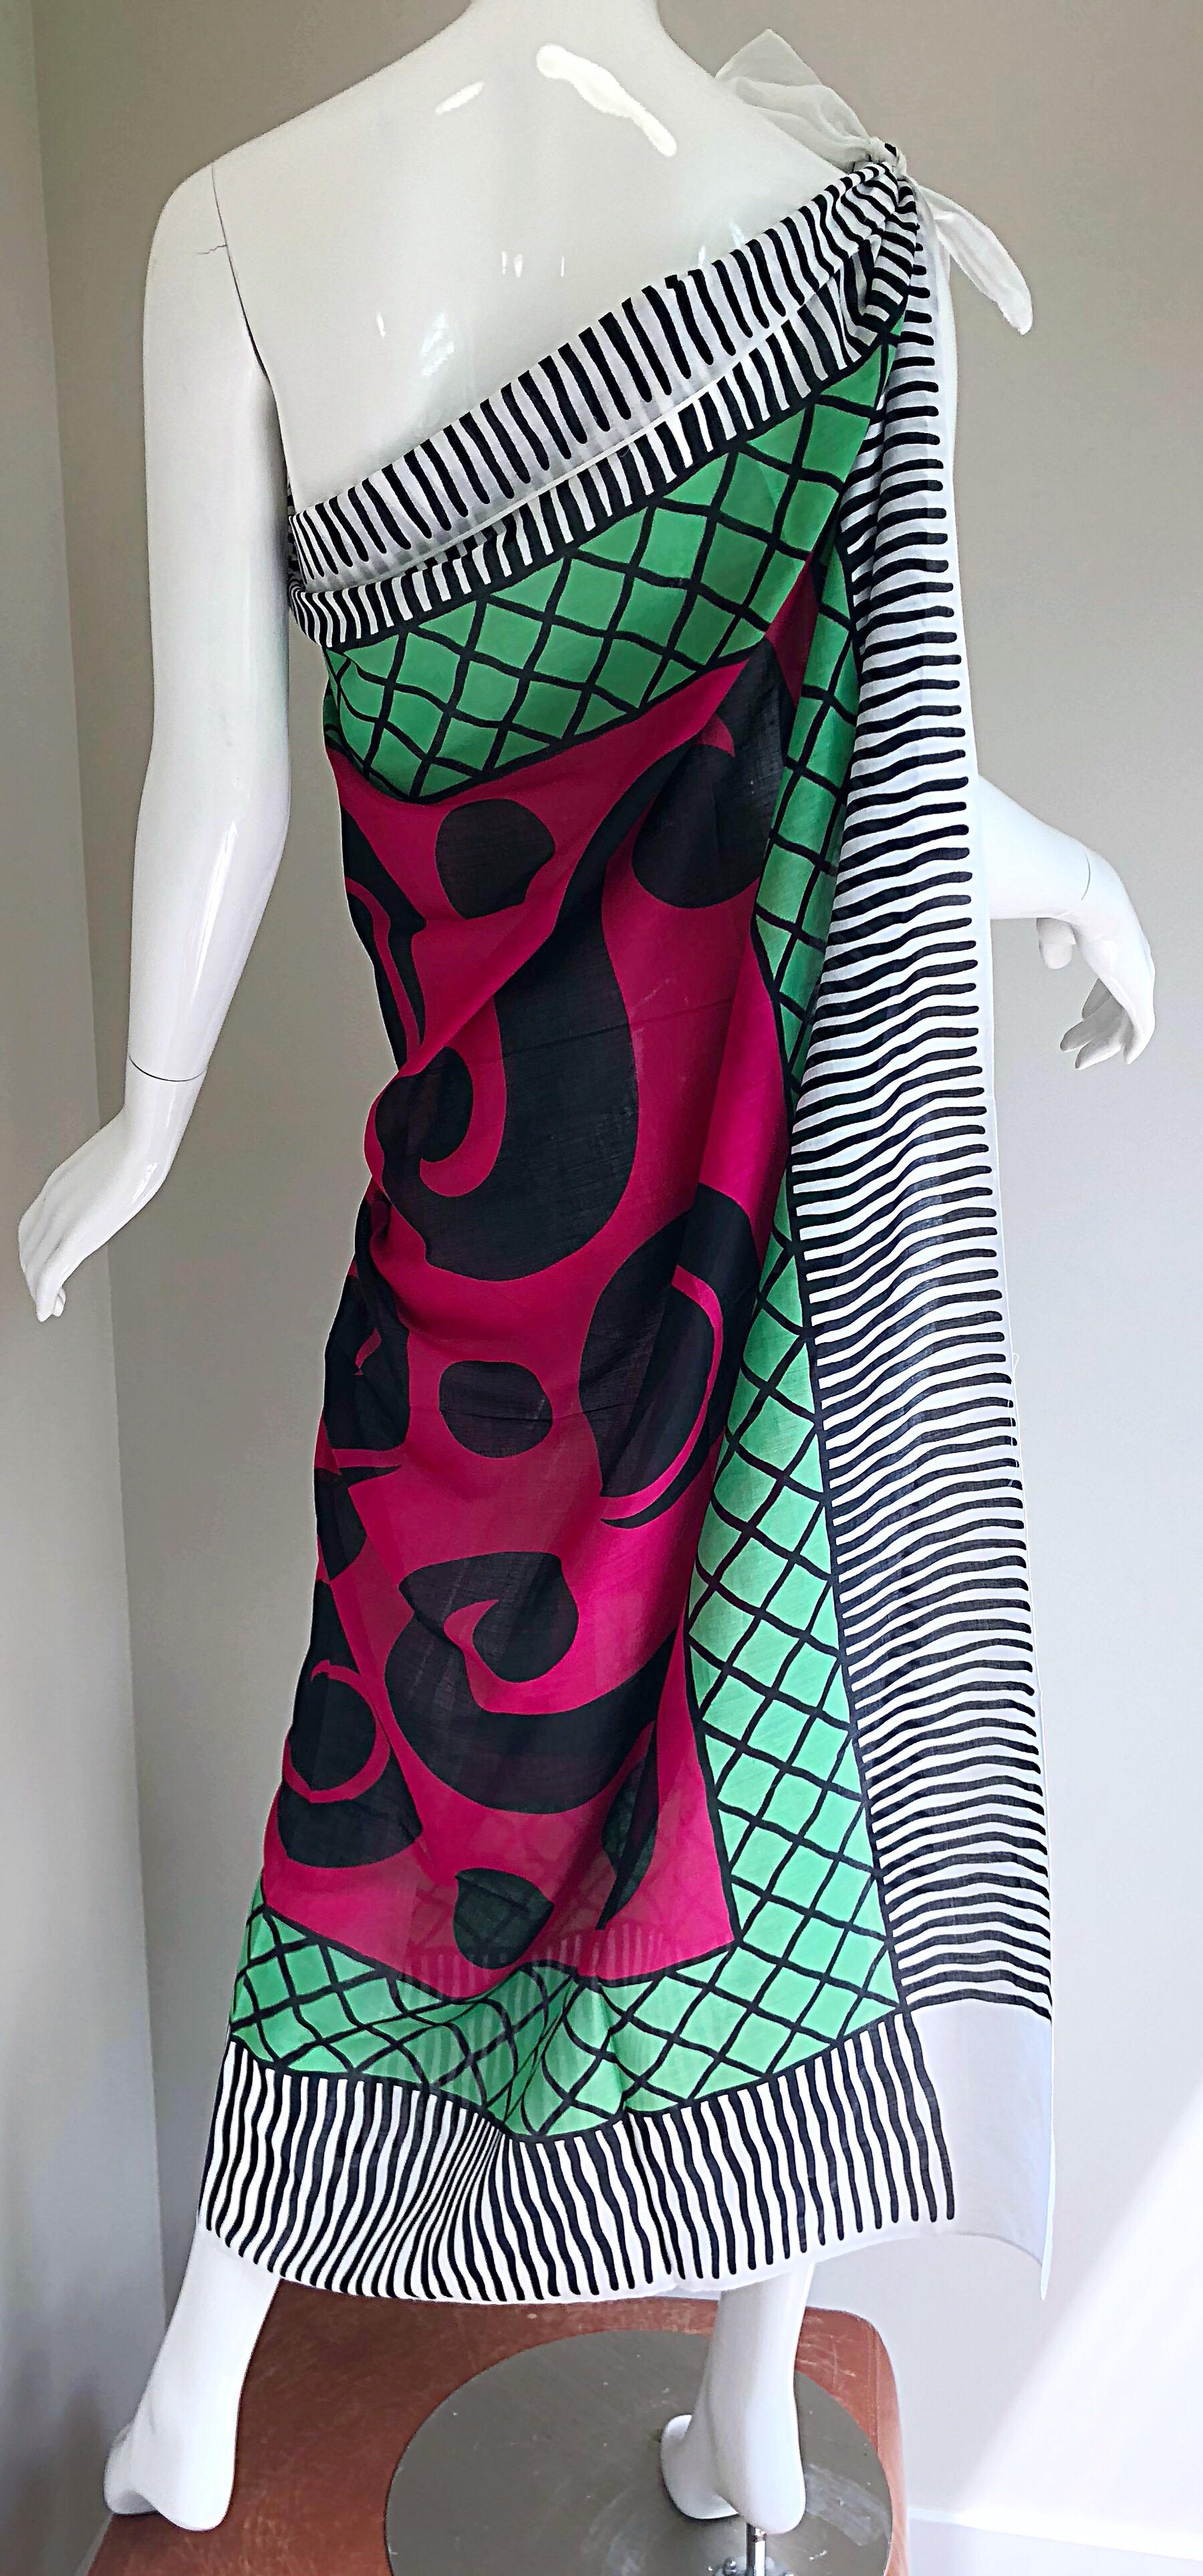 Vintage Yves Saint Laurent Iconic YSL Jumbo 55 x 55 Cotton Shawl Parero Dress In Excellent Condition For Sale In San Diego, CA